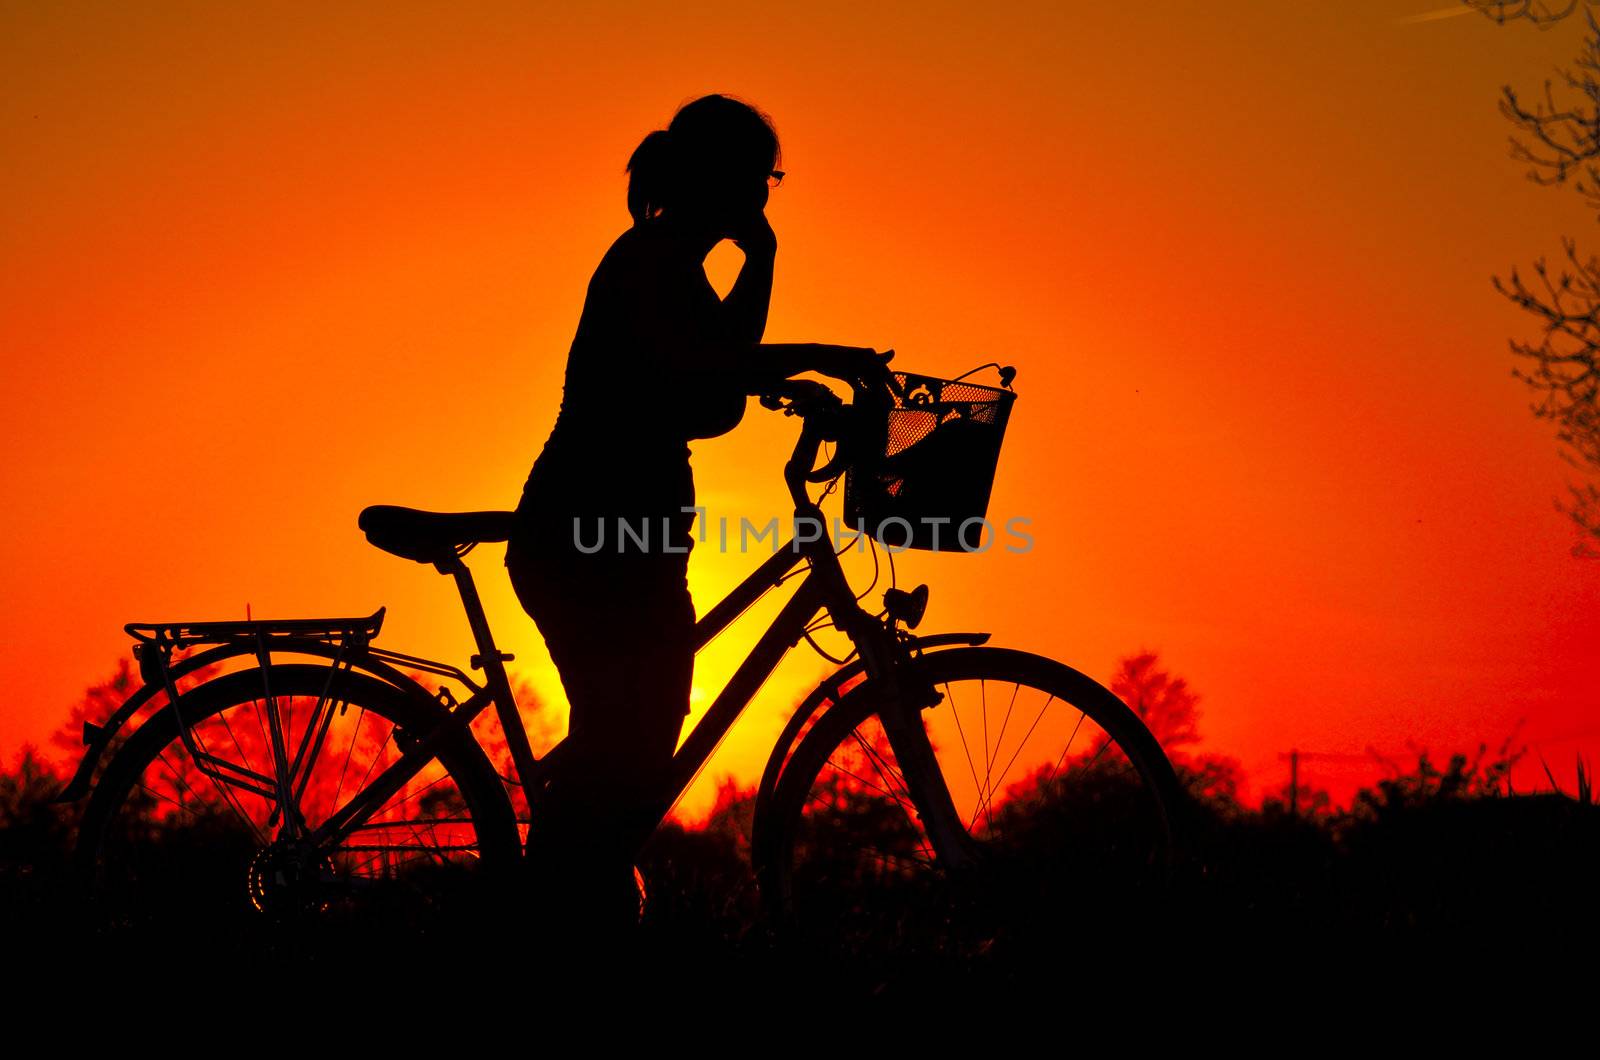 In the picture a young woman riding a bicycle, stopped to admire the splendor of the sunset.